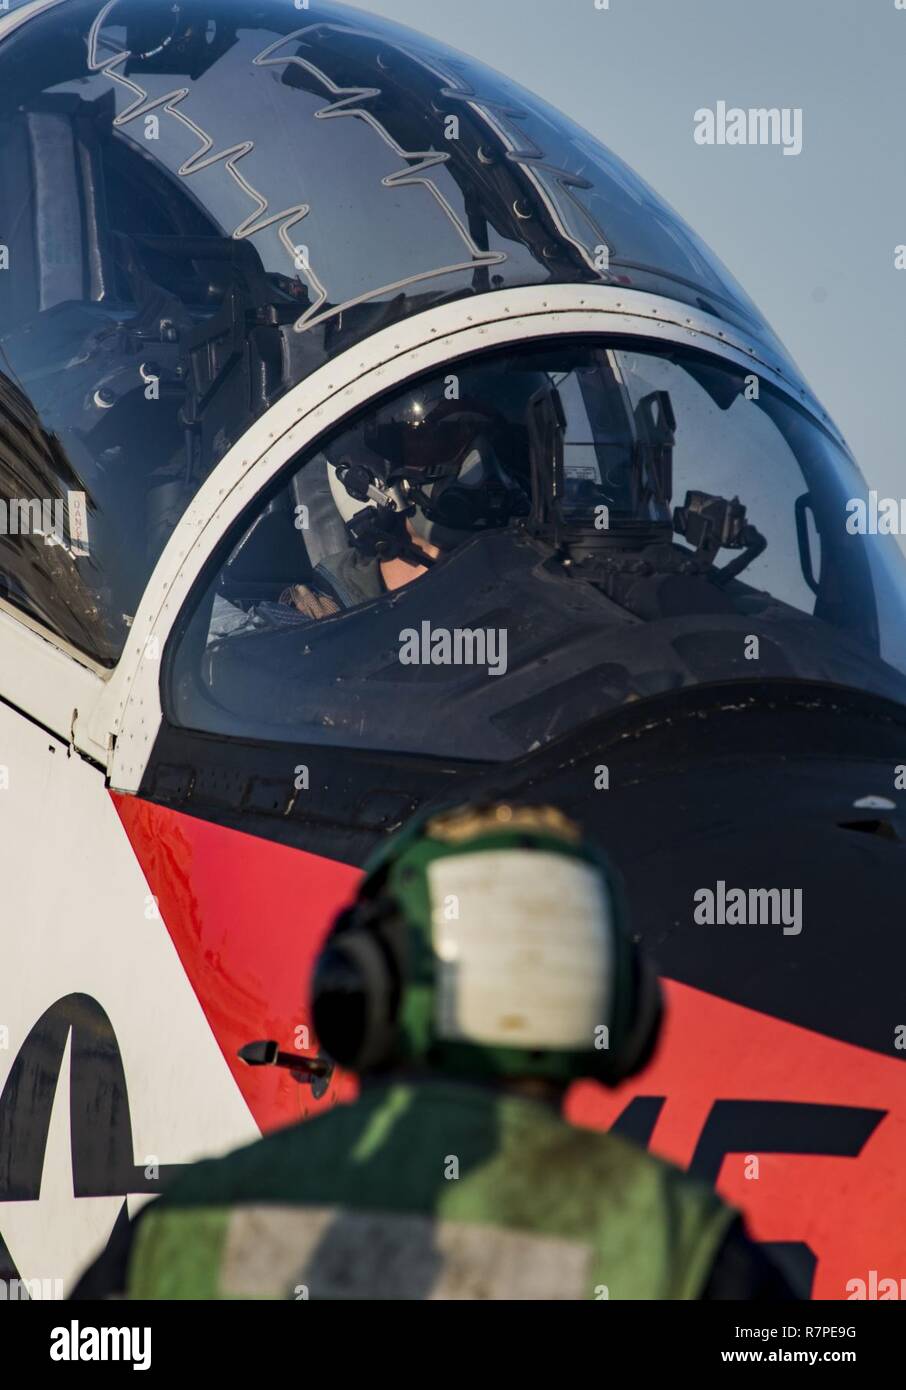 ATLANTIC OCEAN (March 20, 2017) A pilot taxis a T-45C Goshawk assigned to Carrier Training Wing (CTW) 1 across the flight deck of the aircraft carrier USS Dwight D. Eisenhower (CVN 69) (Ike). Ike is currently conducting aircraft carrier qualifications during the sustainment phase of the Optimized Fleet Response Plan (OFRP). Stock Photo